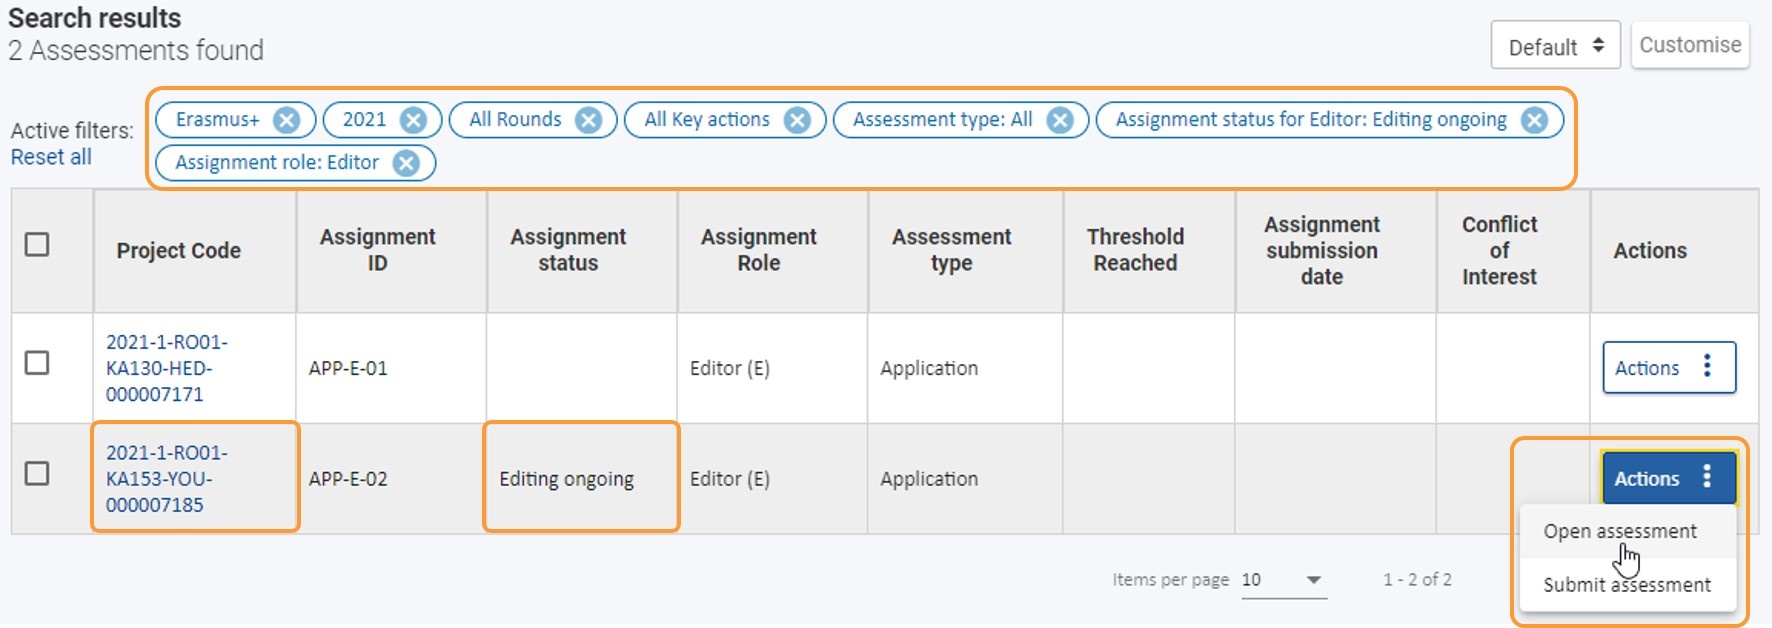 Filter your assignment(s) in status Editing ongoing and open the assignment to work on